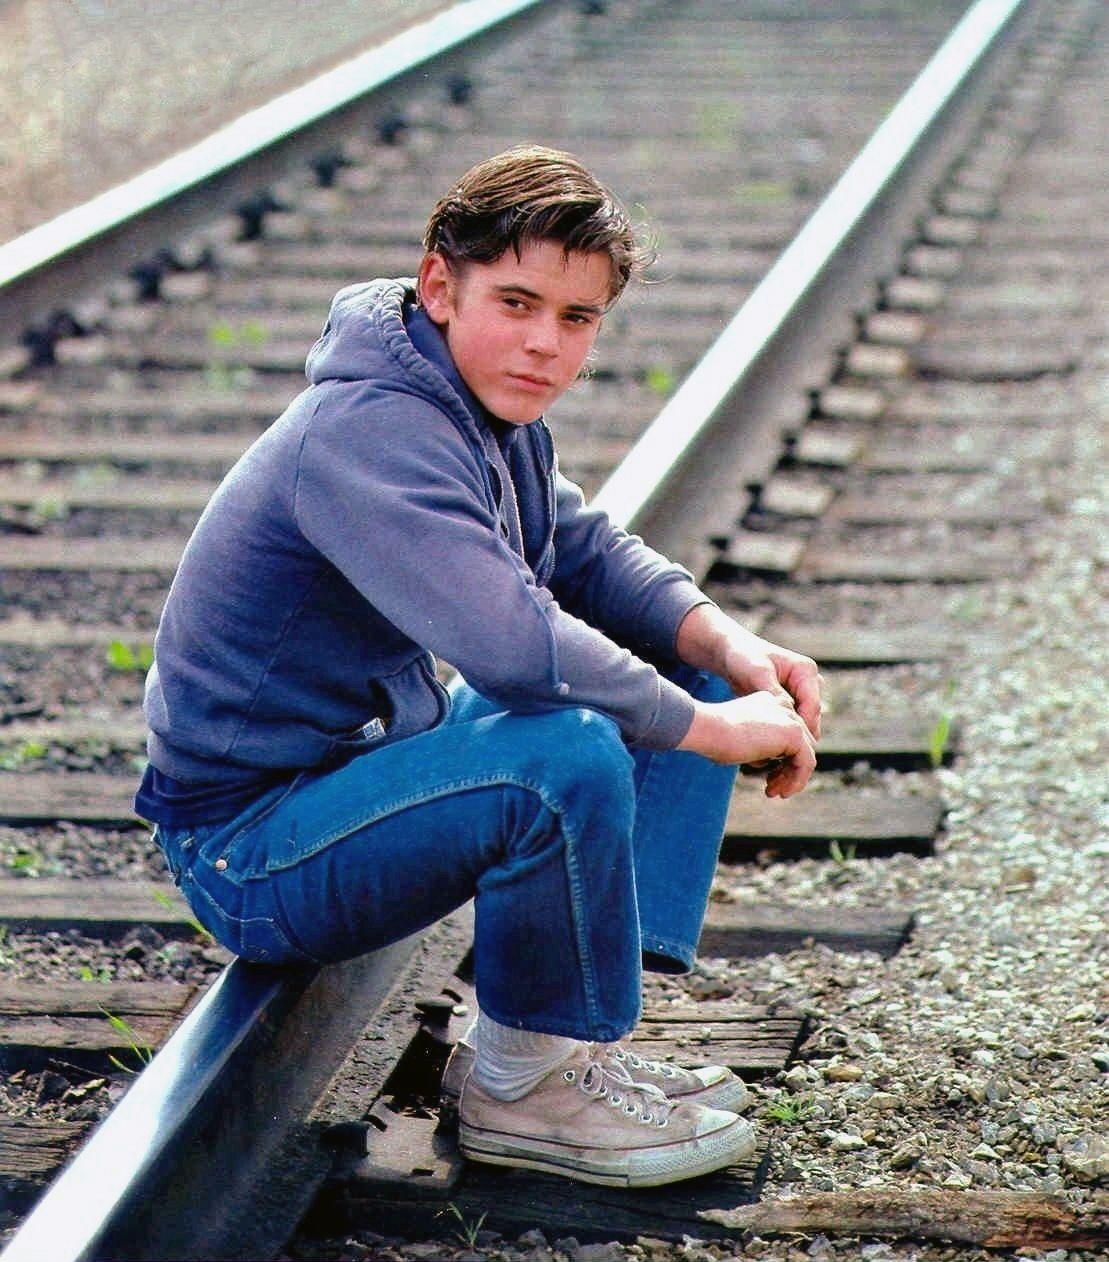 C. Thomas Howell as 'Ponyboy Curtis' in The Outsiders (1983). Les